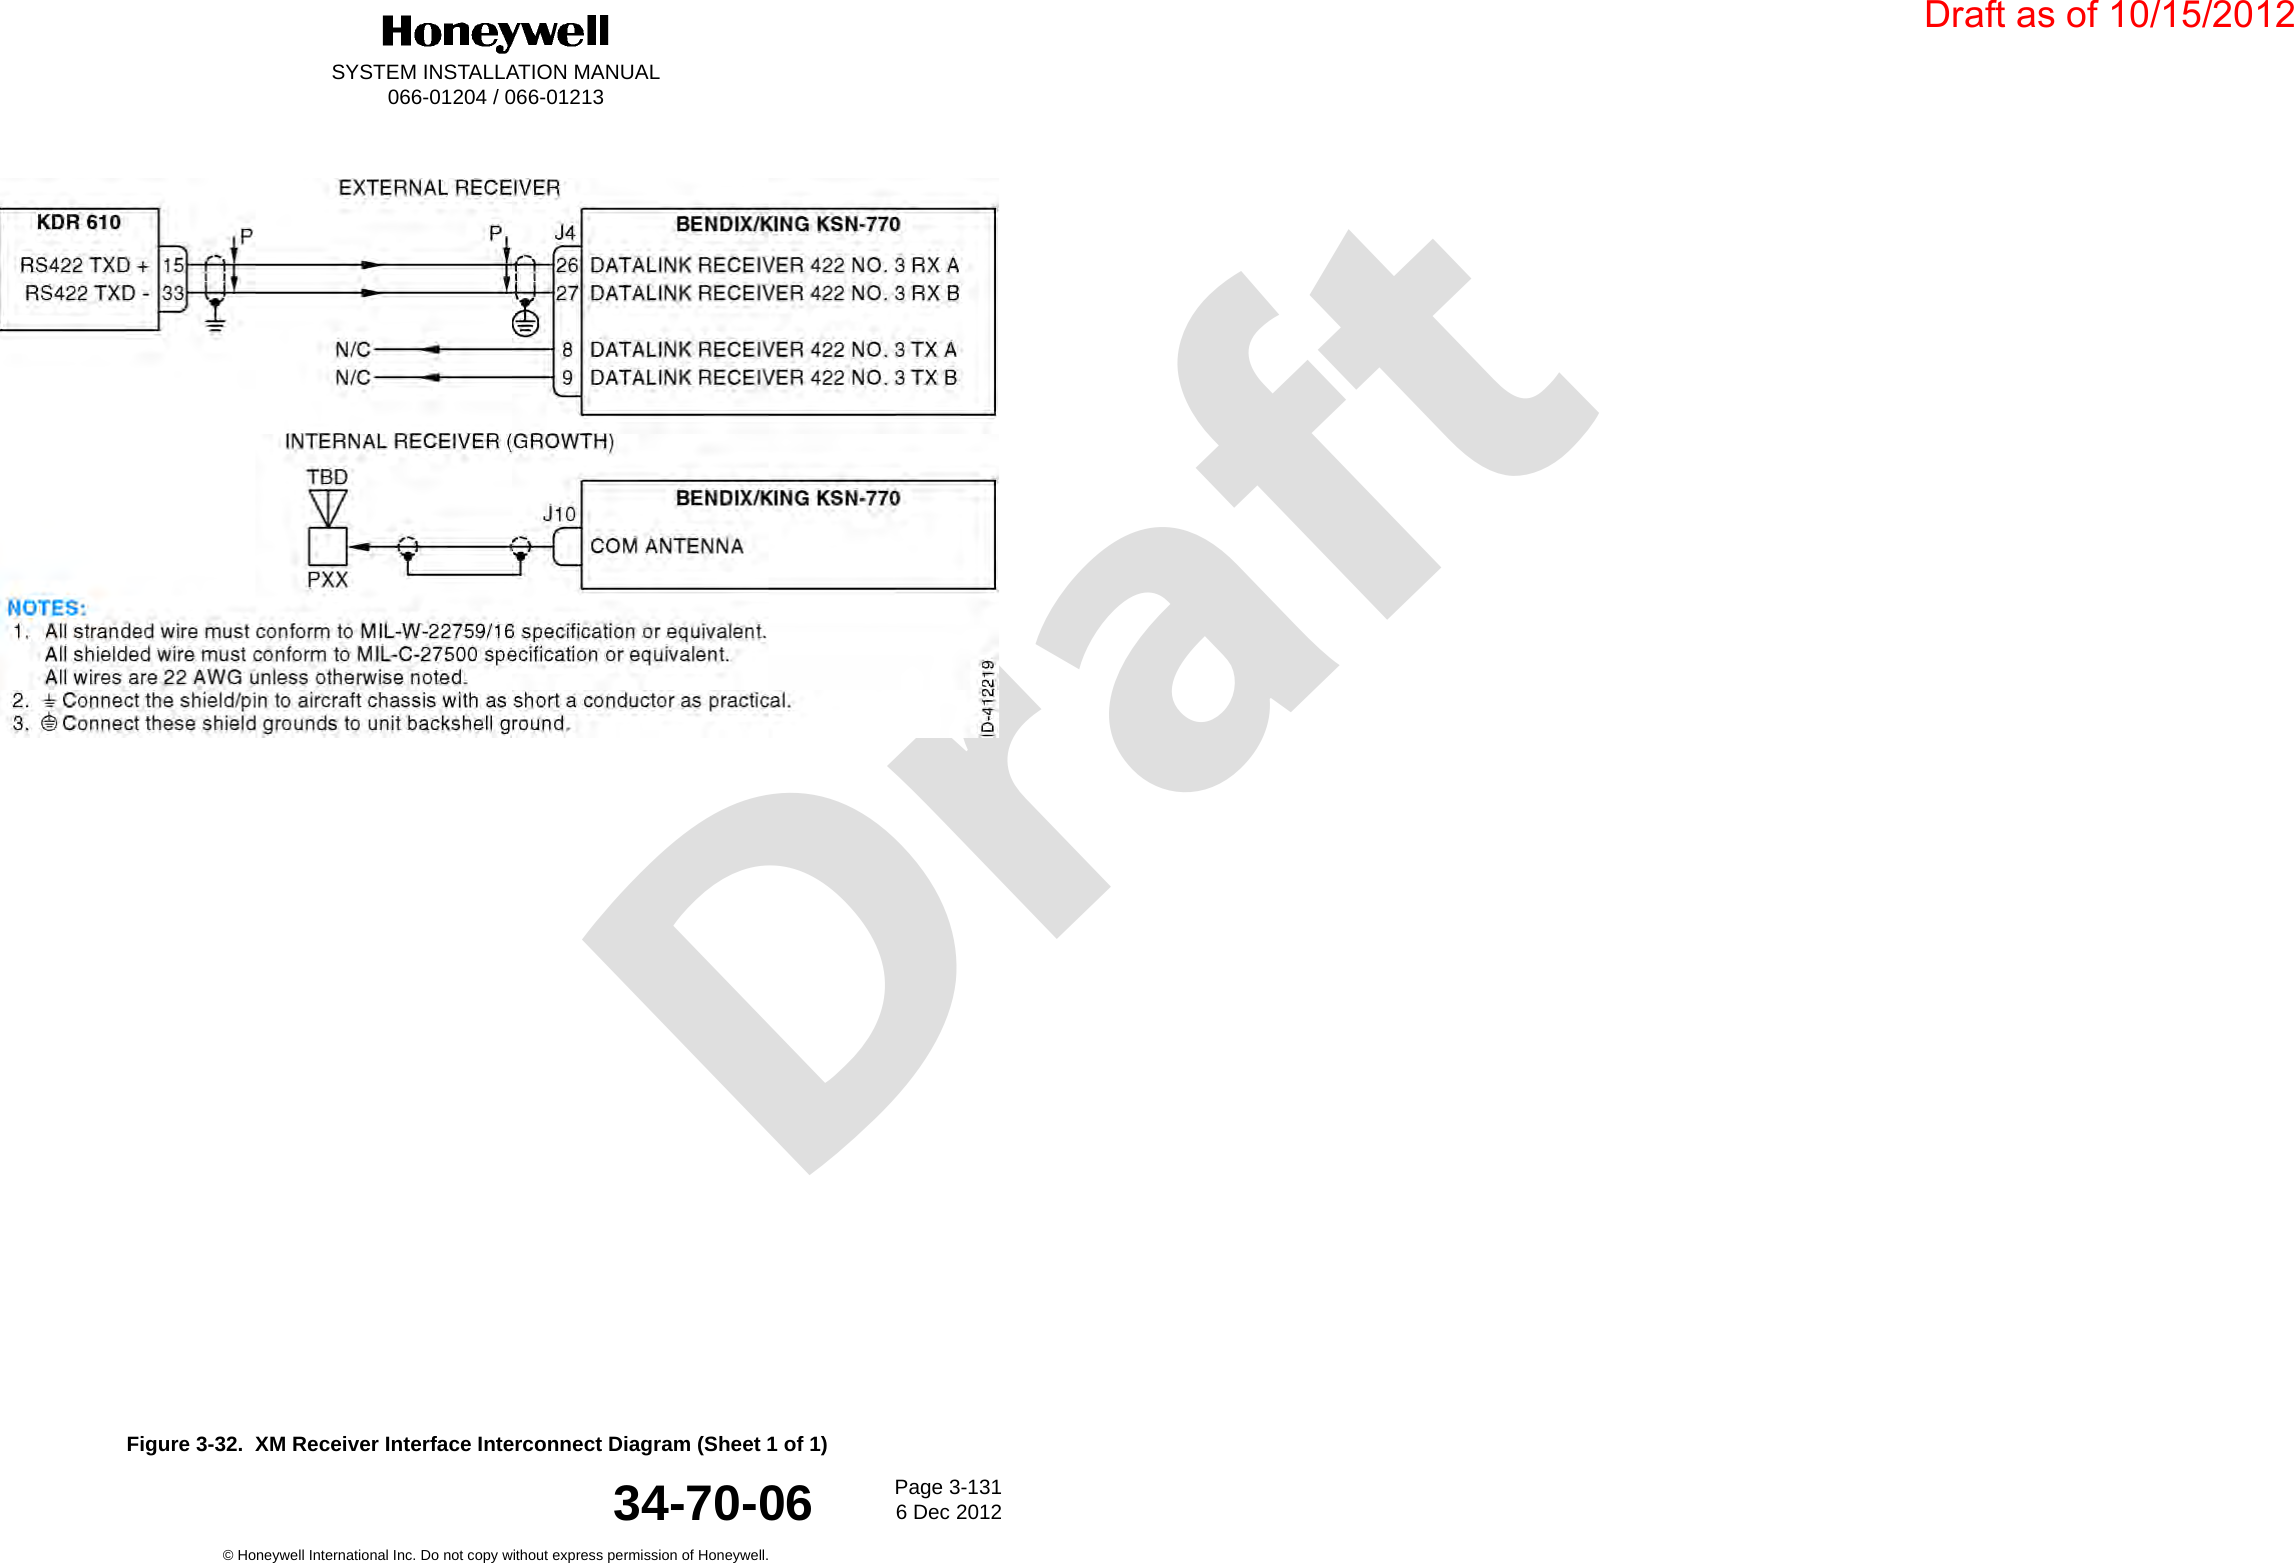 DraftSYSTEM INSTALLATION MANUAL066-01204 / 066-01213Page 3-1316 Dec 2012© Honeywell International Inc. Do not copy without express permission of Honeywell.34-70-06Figure 3-32.  XM Receiver Interface Interconnect Diagram (Sheet 1 of 1)Draft as of 10/15/2012